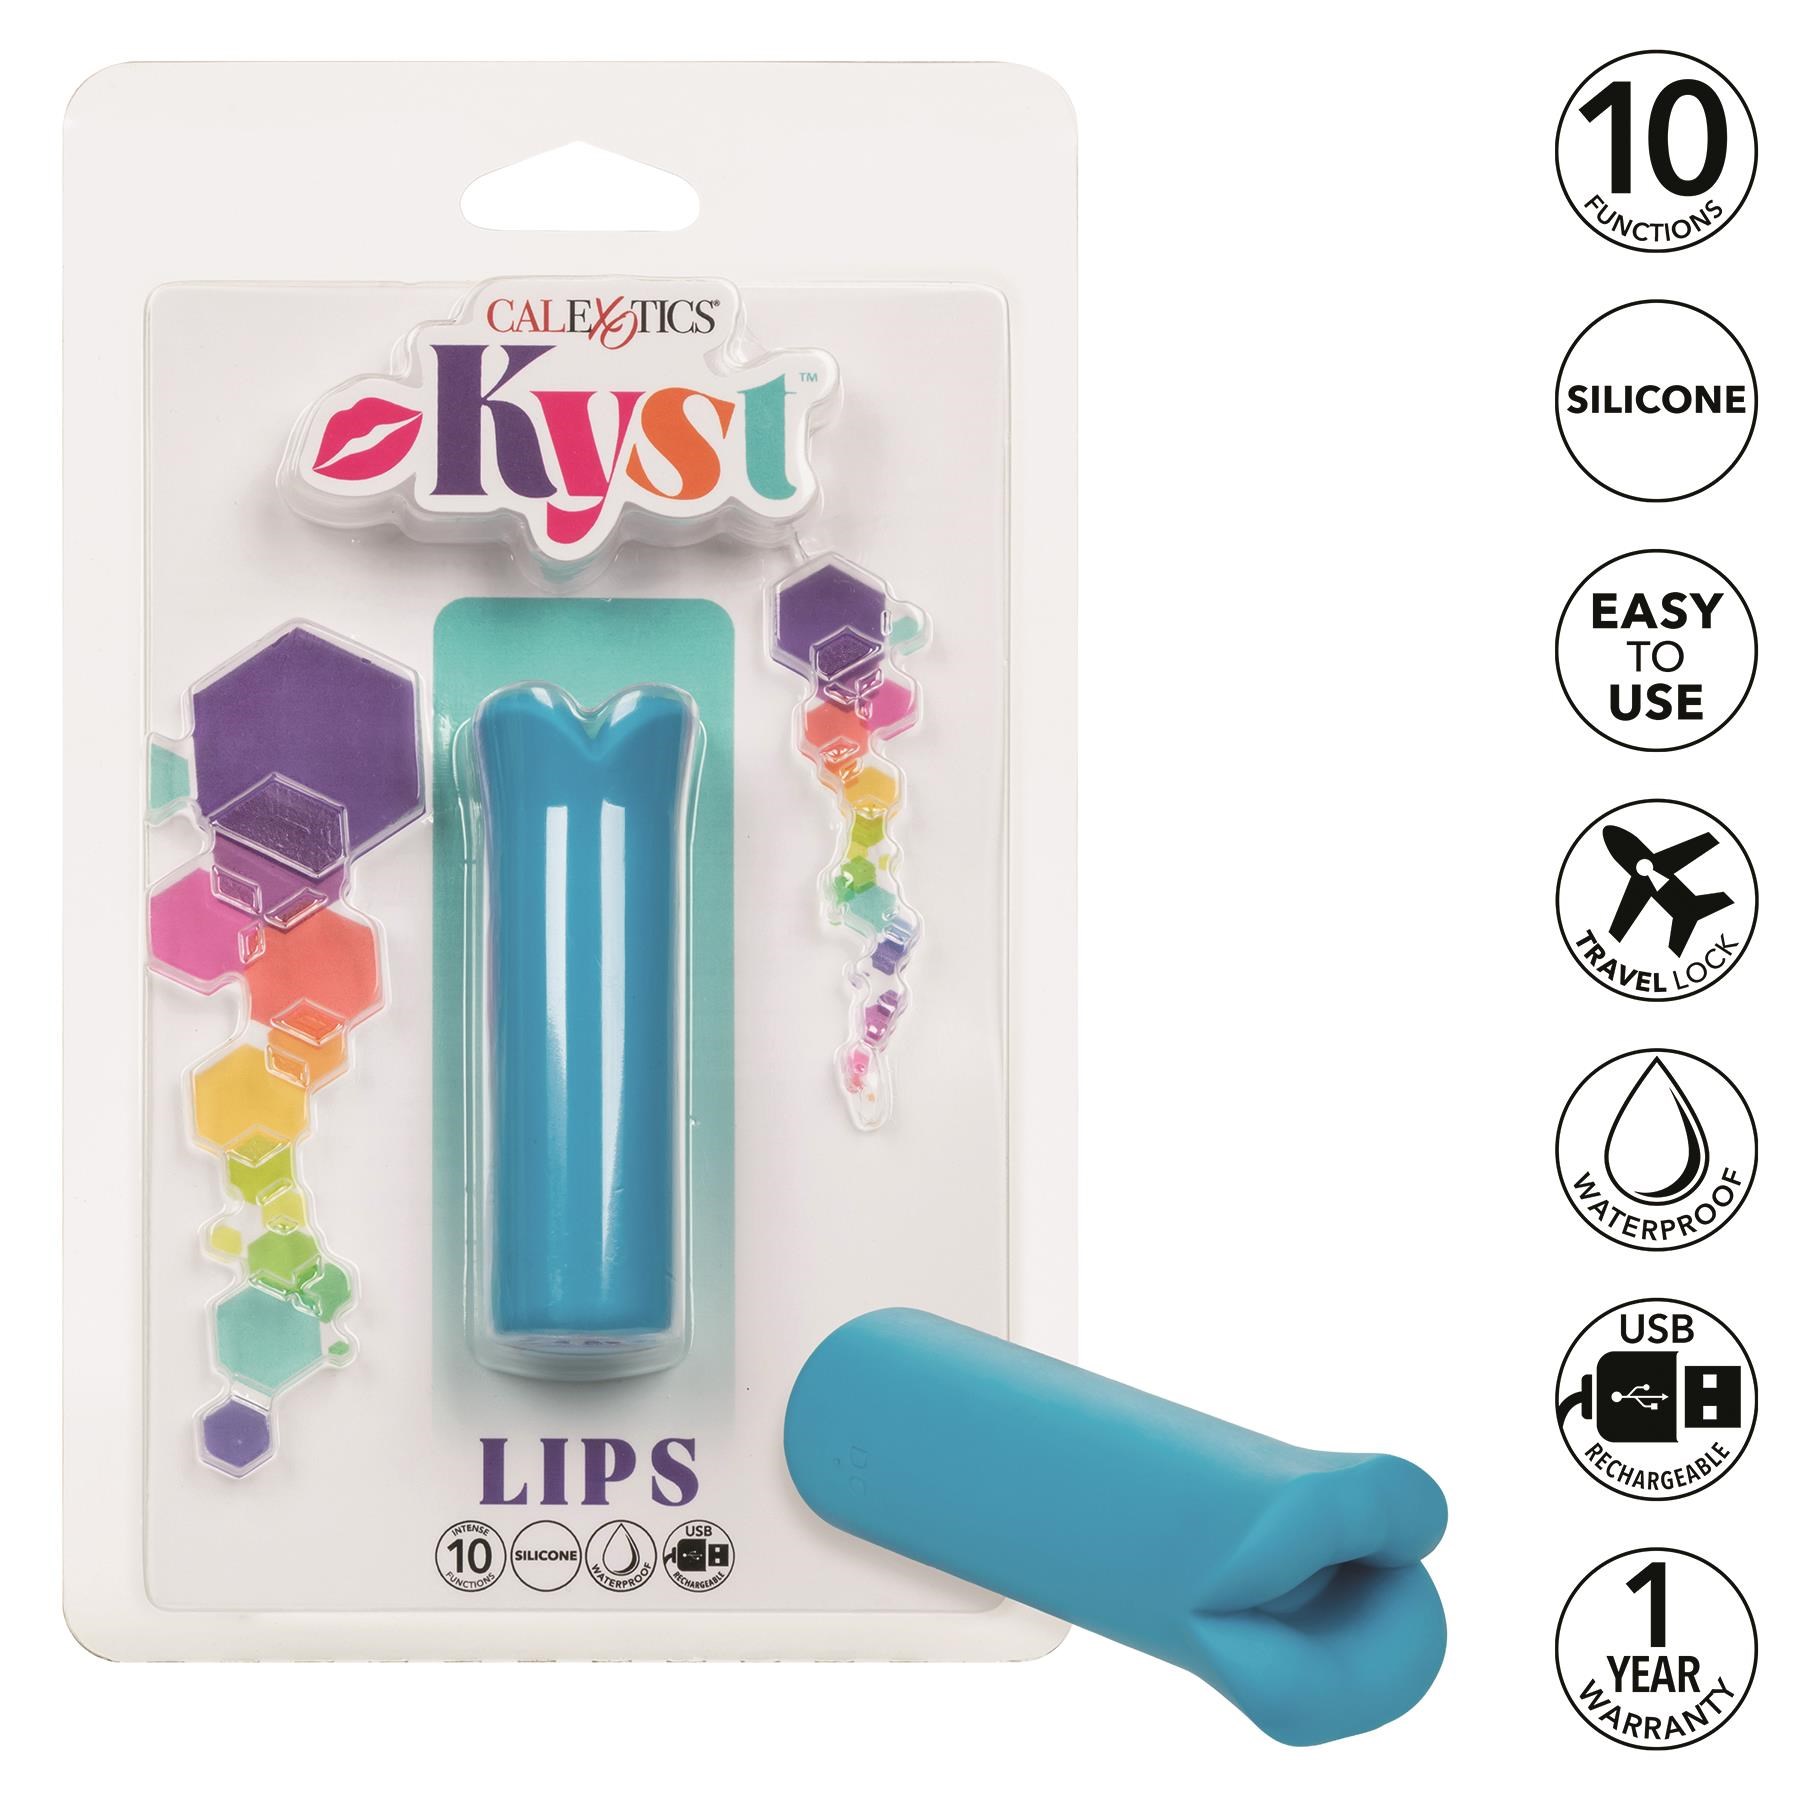 Kyst Lips Clitoral Massager - Features